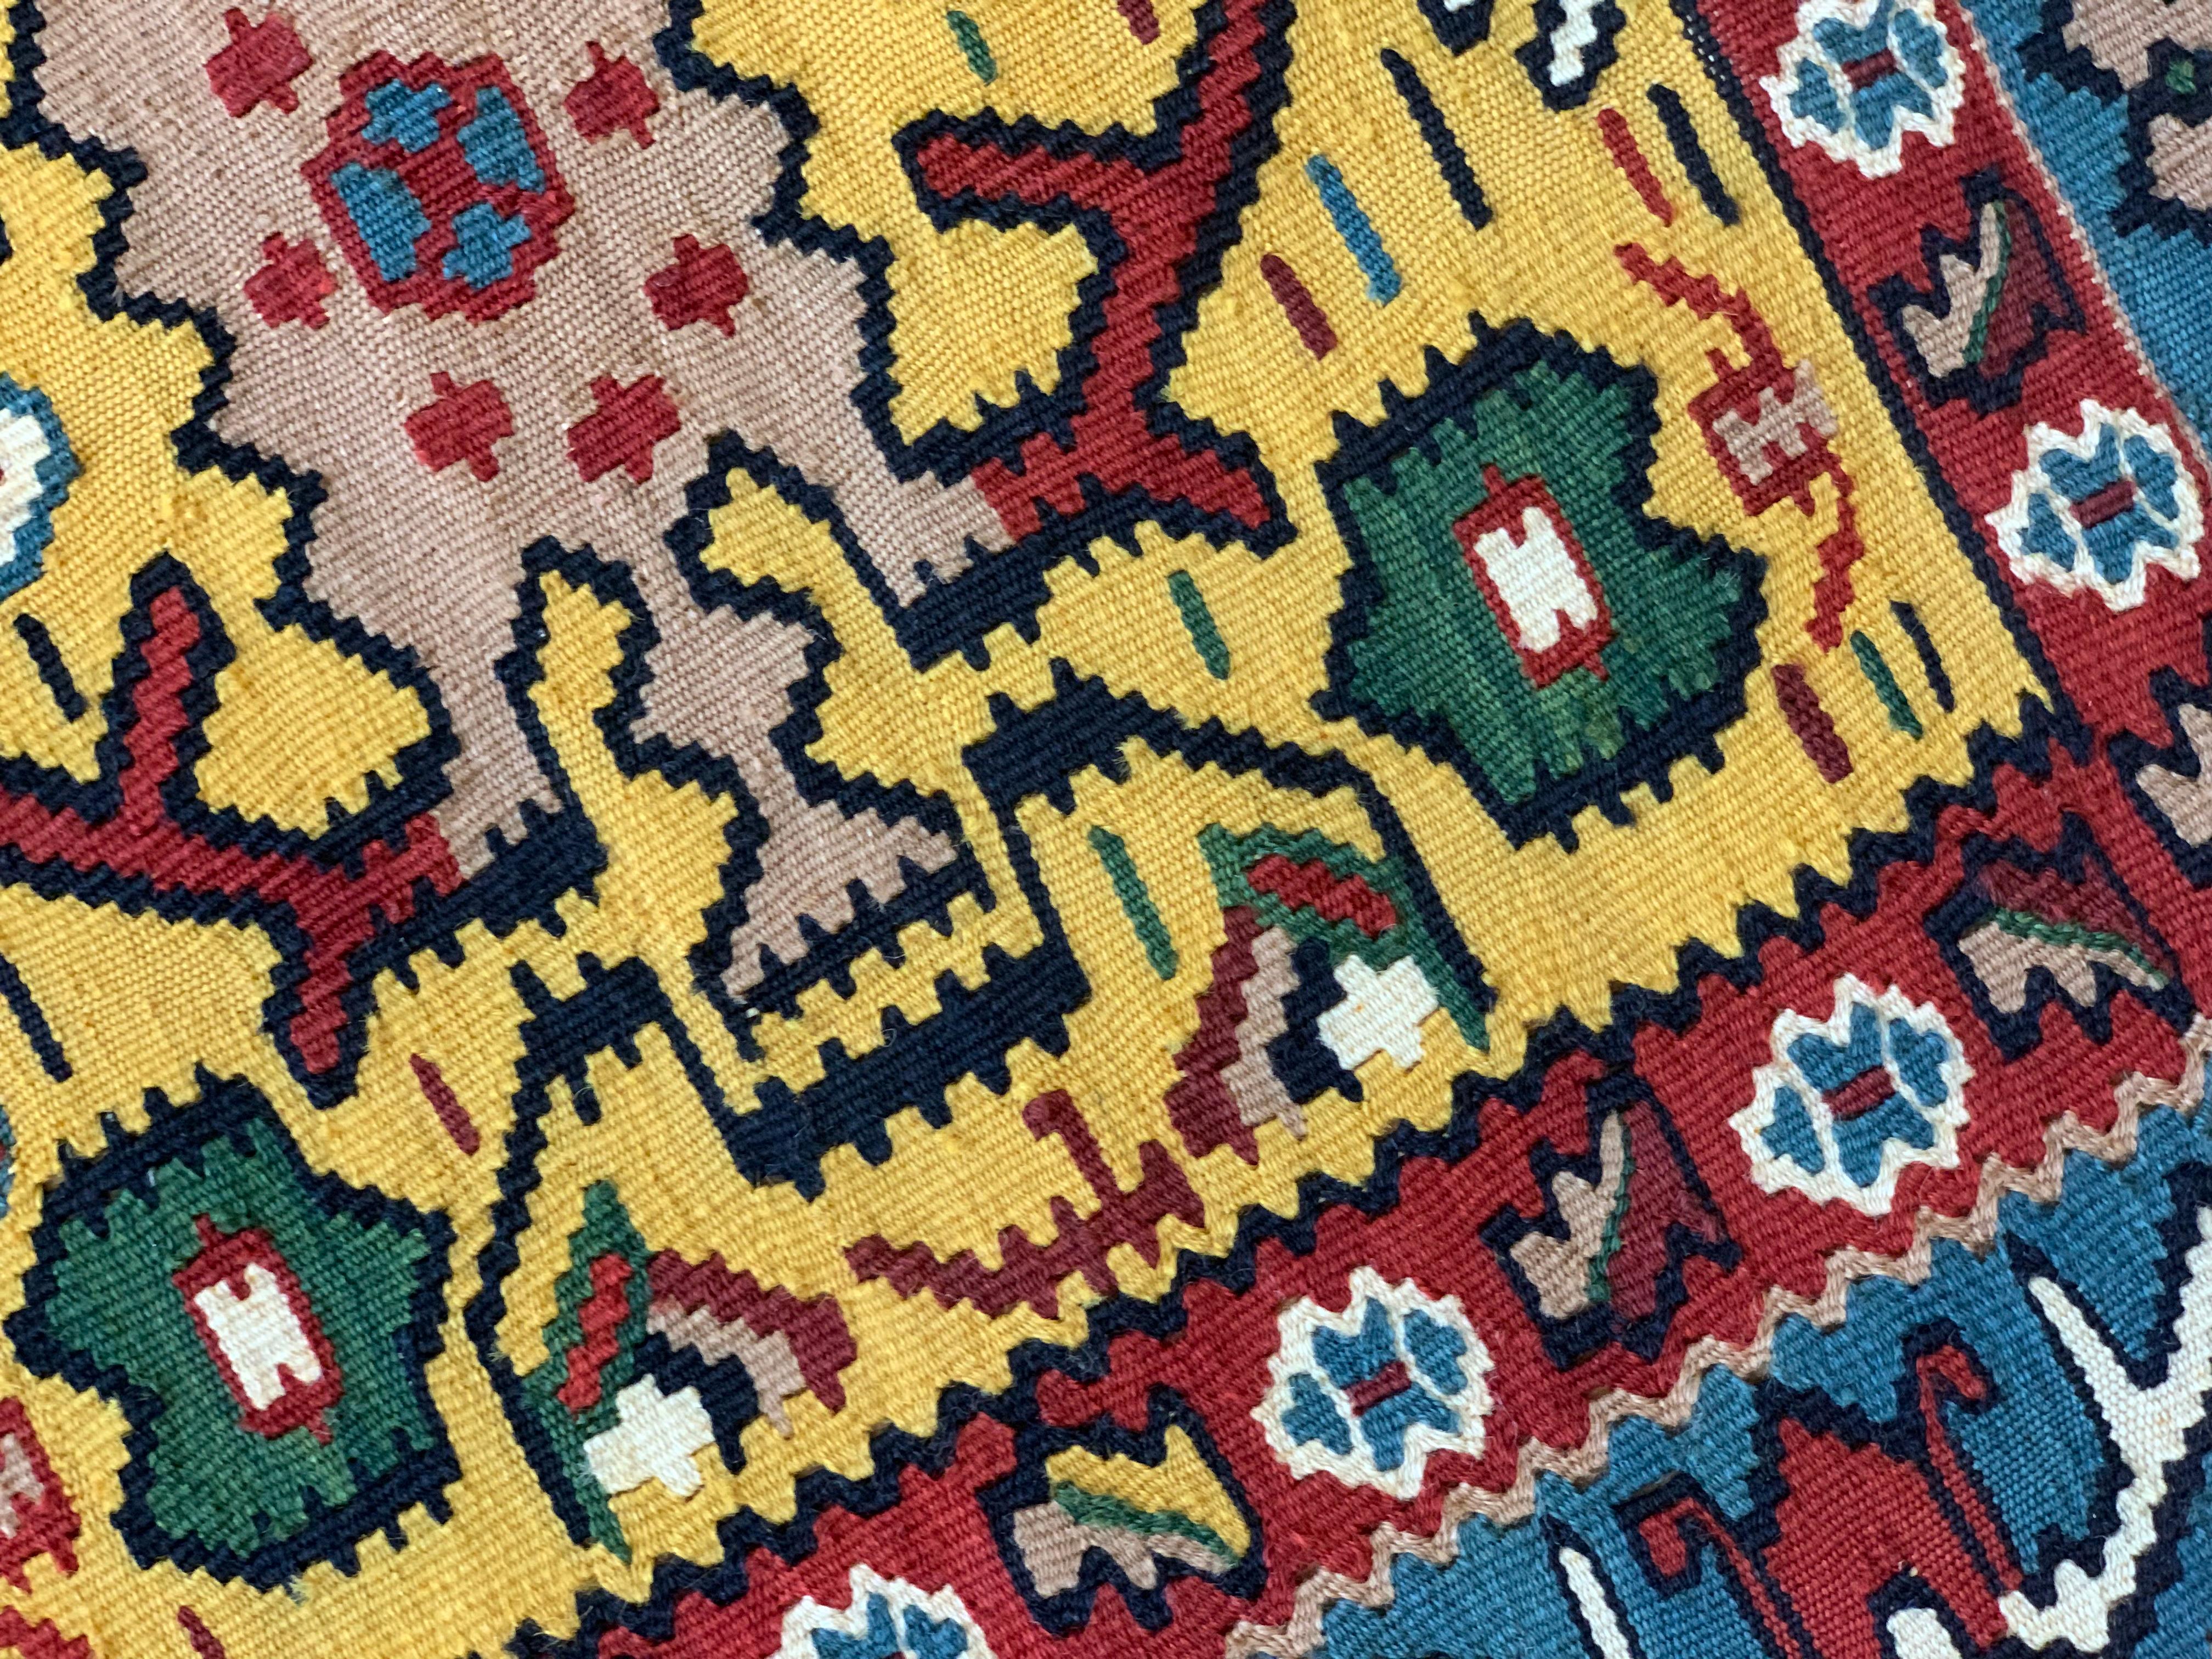 These two bold area rugs are handmade Kurdish Kilim rugs woven in the early 21st century, circa 2010. The design features a bold yellow background that has been decorated with accents of red, blue, ivory, and beige accents that make up the